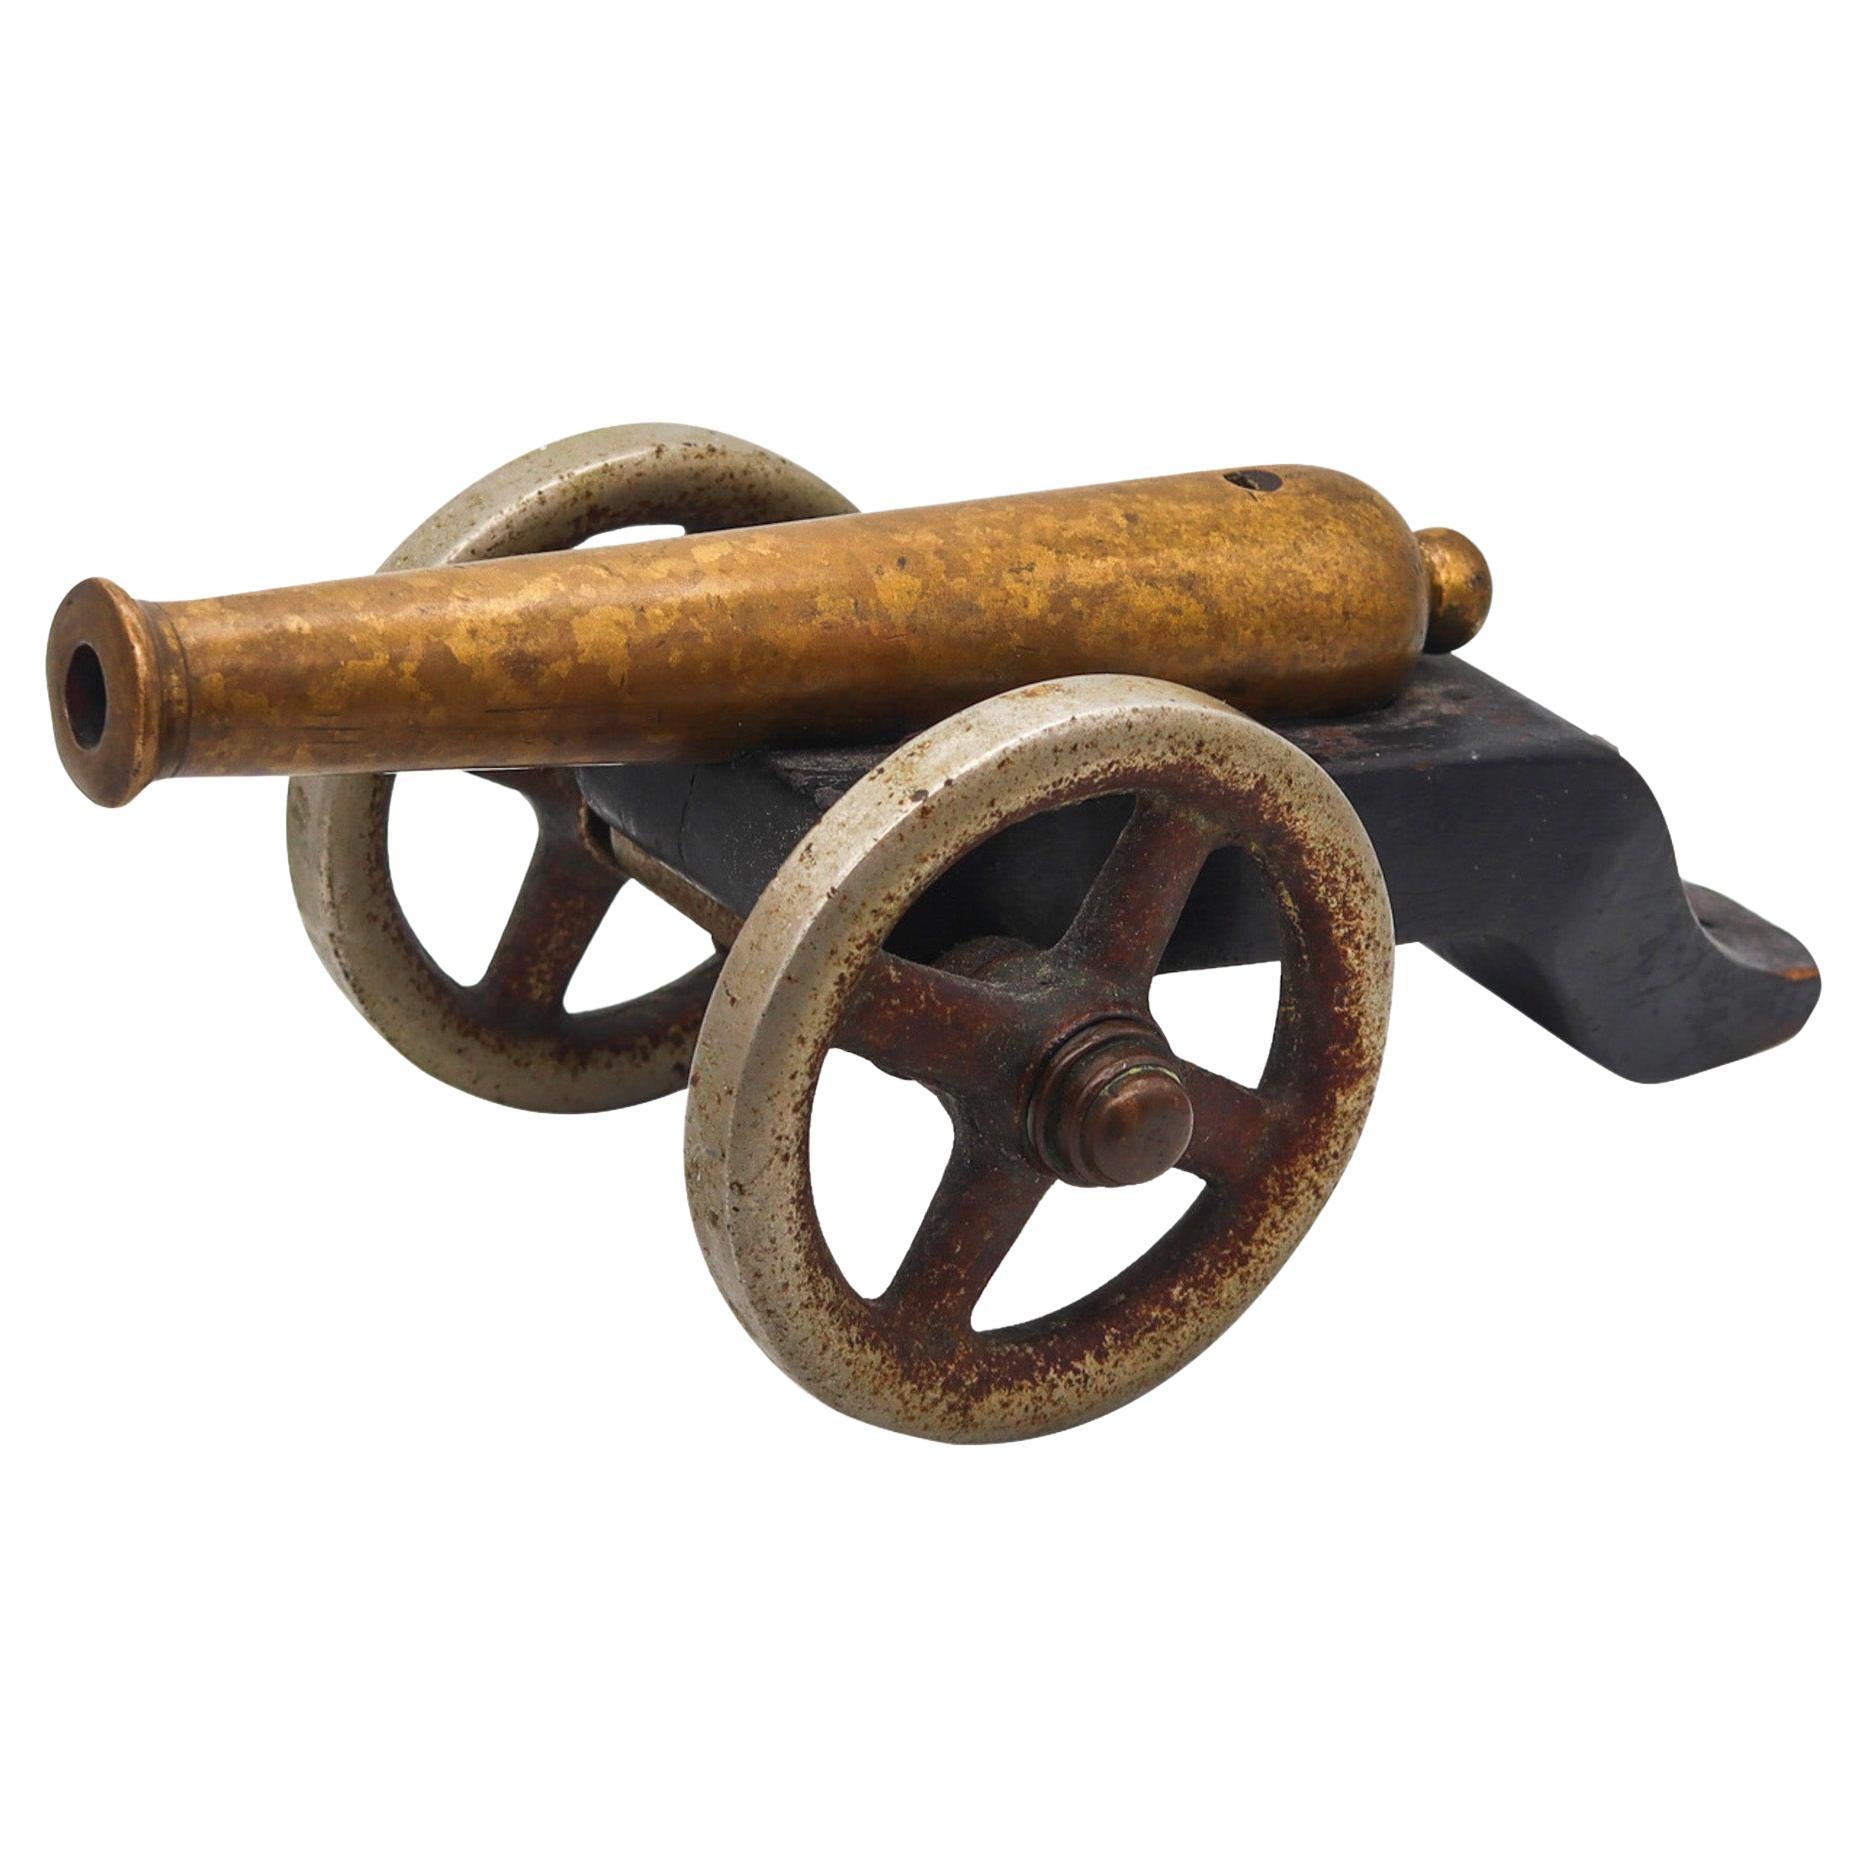 Navy Signal Cannon 18th / 19th Century European Brass Barrel And Wood Carriage